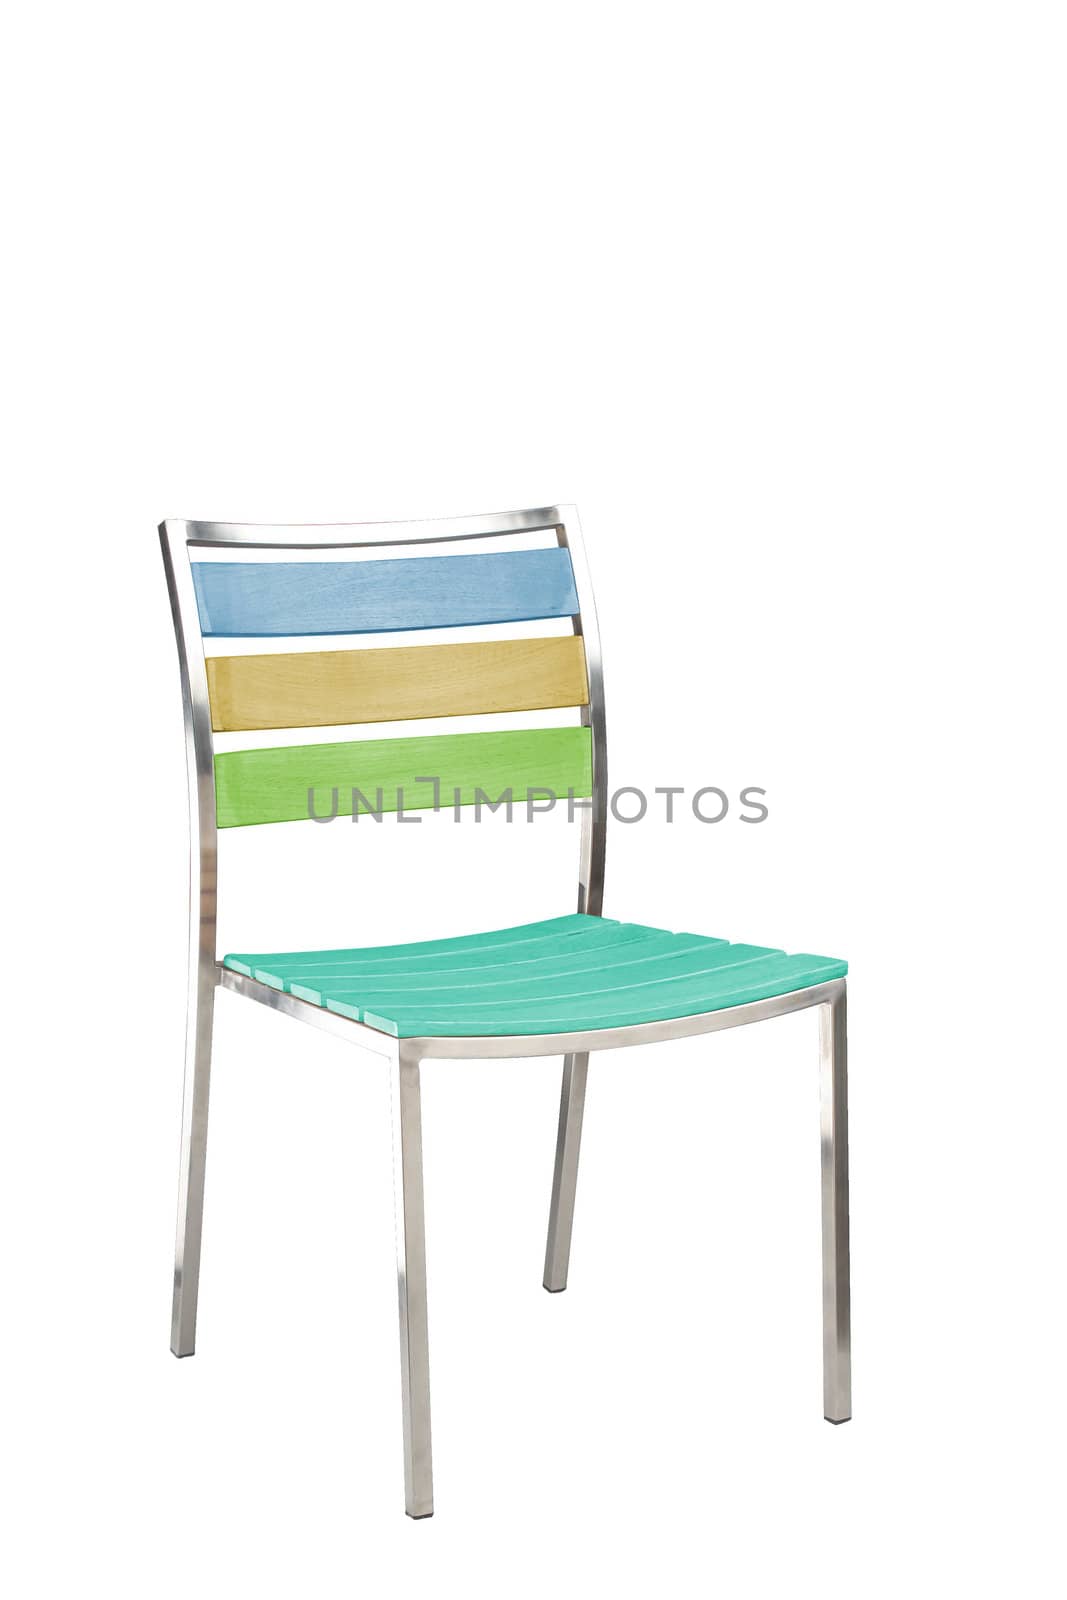 Wooden chair isolated